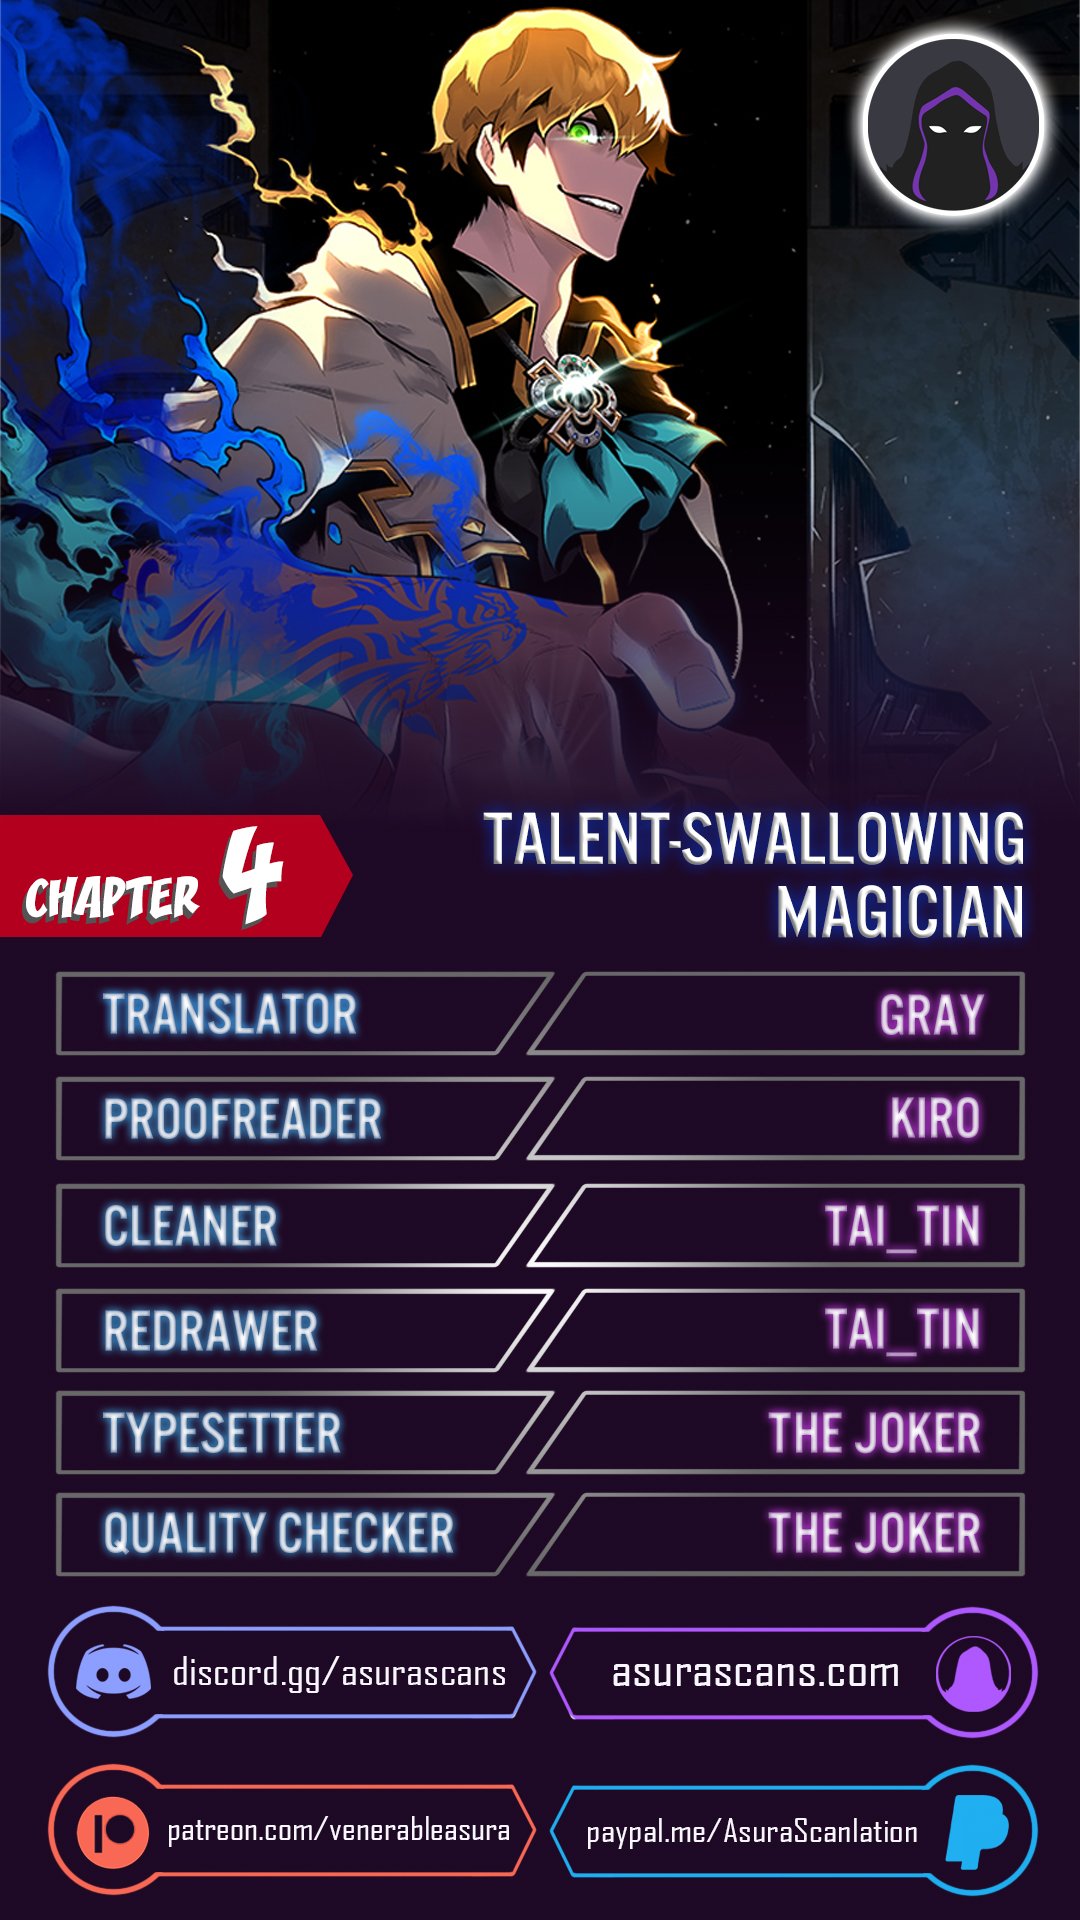 Talent-Swallowing Magician - Chapter 15402 - Image 1